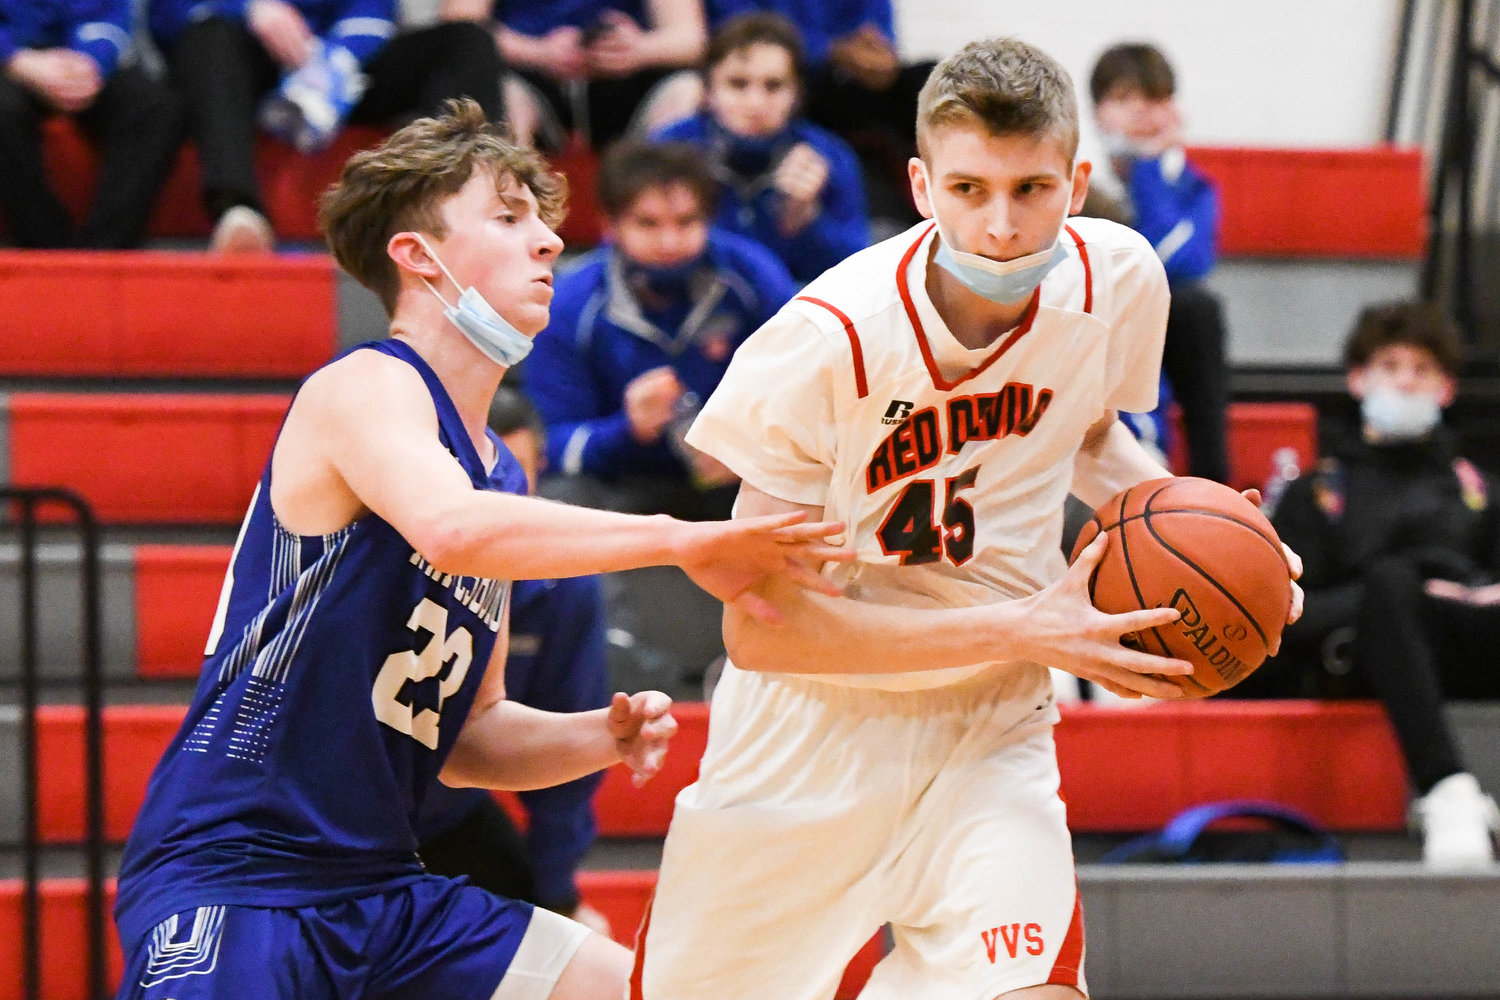 MOVING THE BALL — Vernon-Verona-Sherrill’s Nathan Costello, right, moves the ball against Whitesboro defender Caden Morris during the Tri-Valley League game on Thursday night. The Red Devils won 48-47.